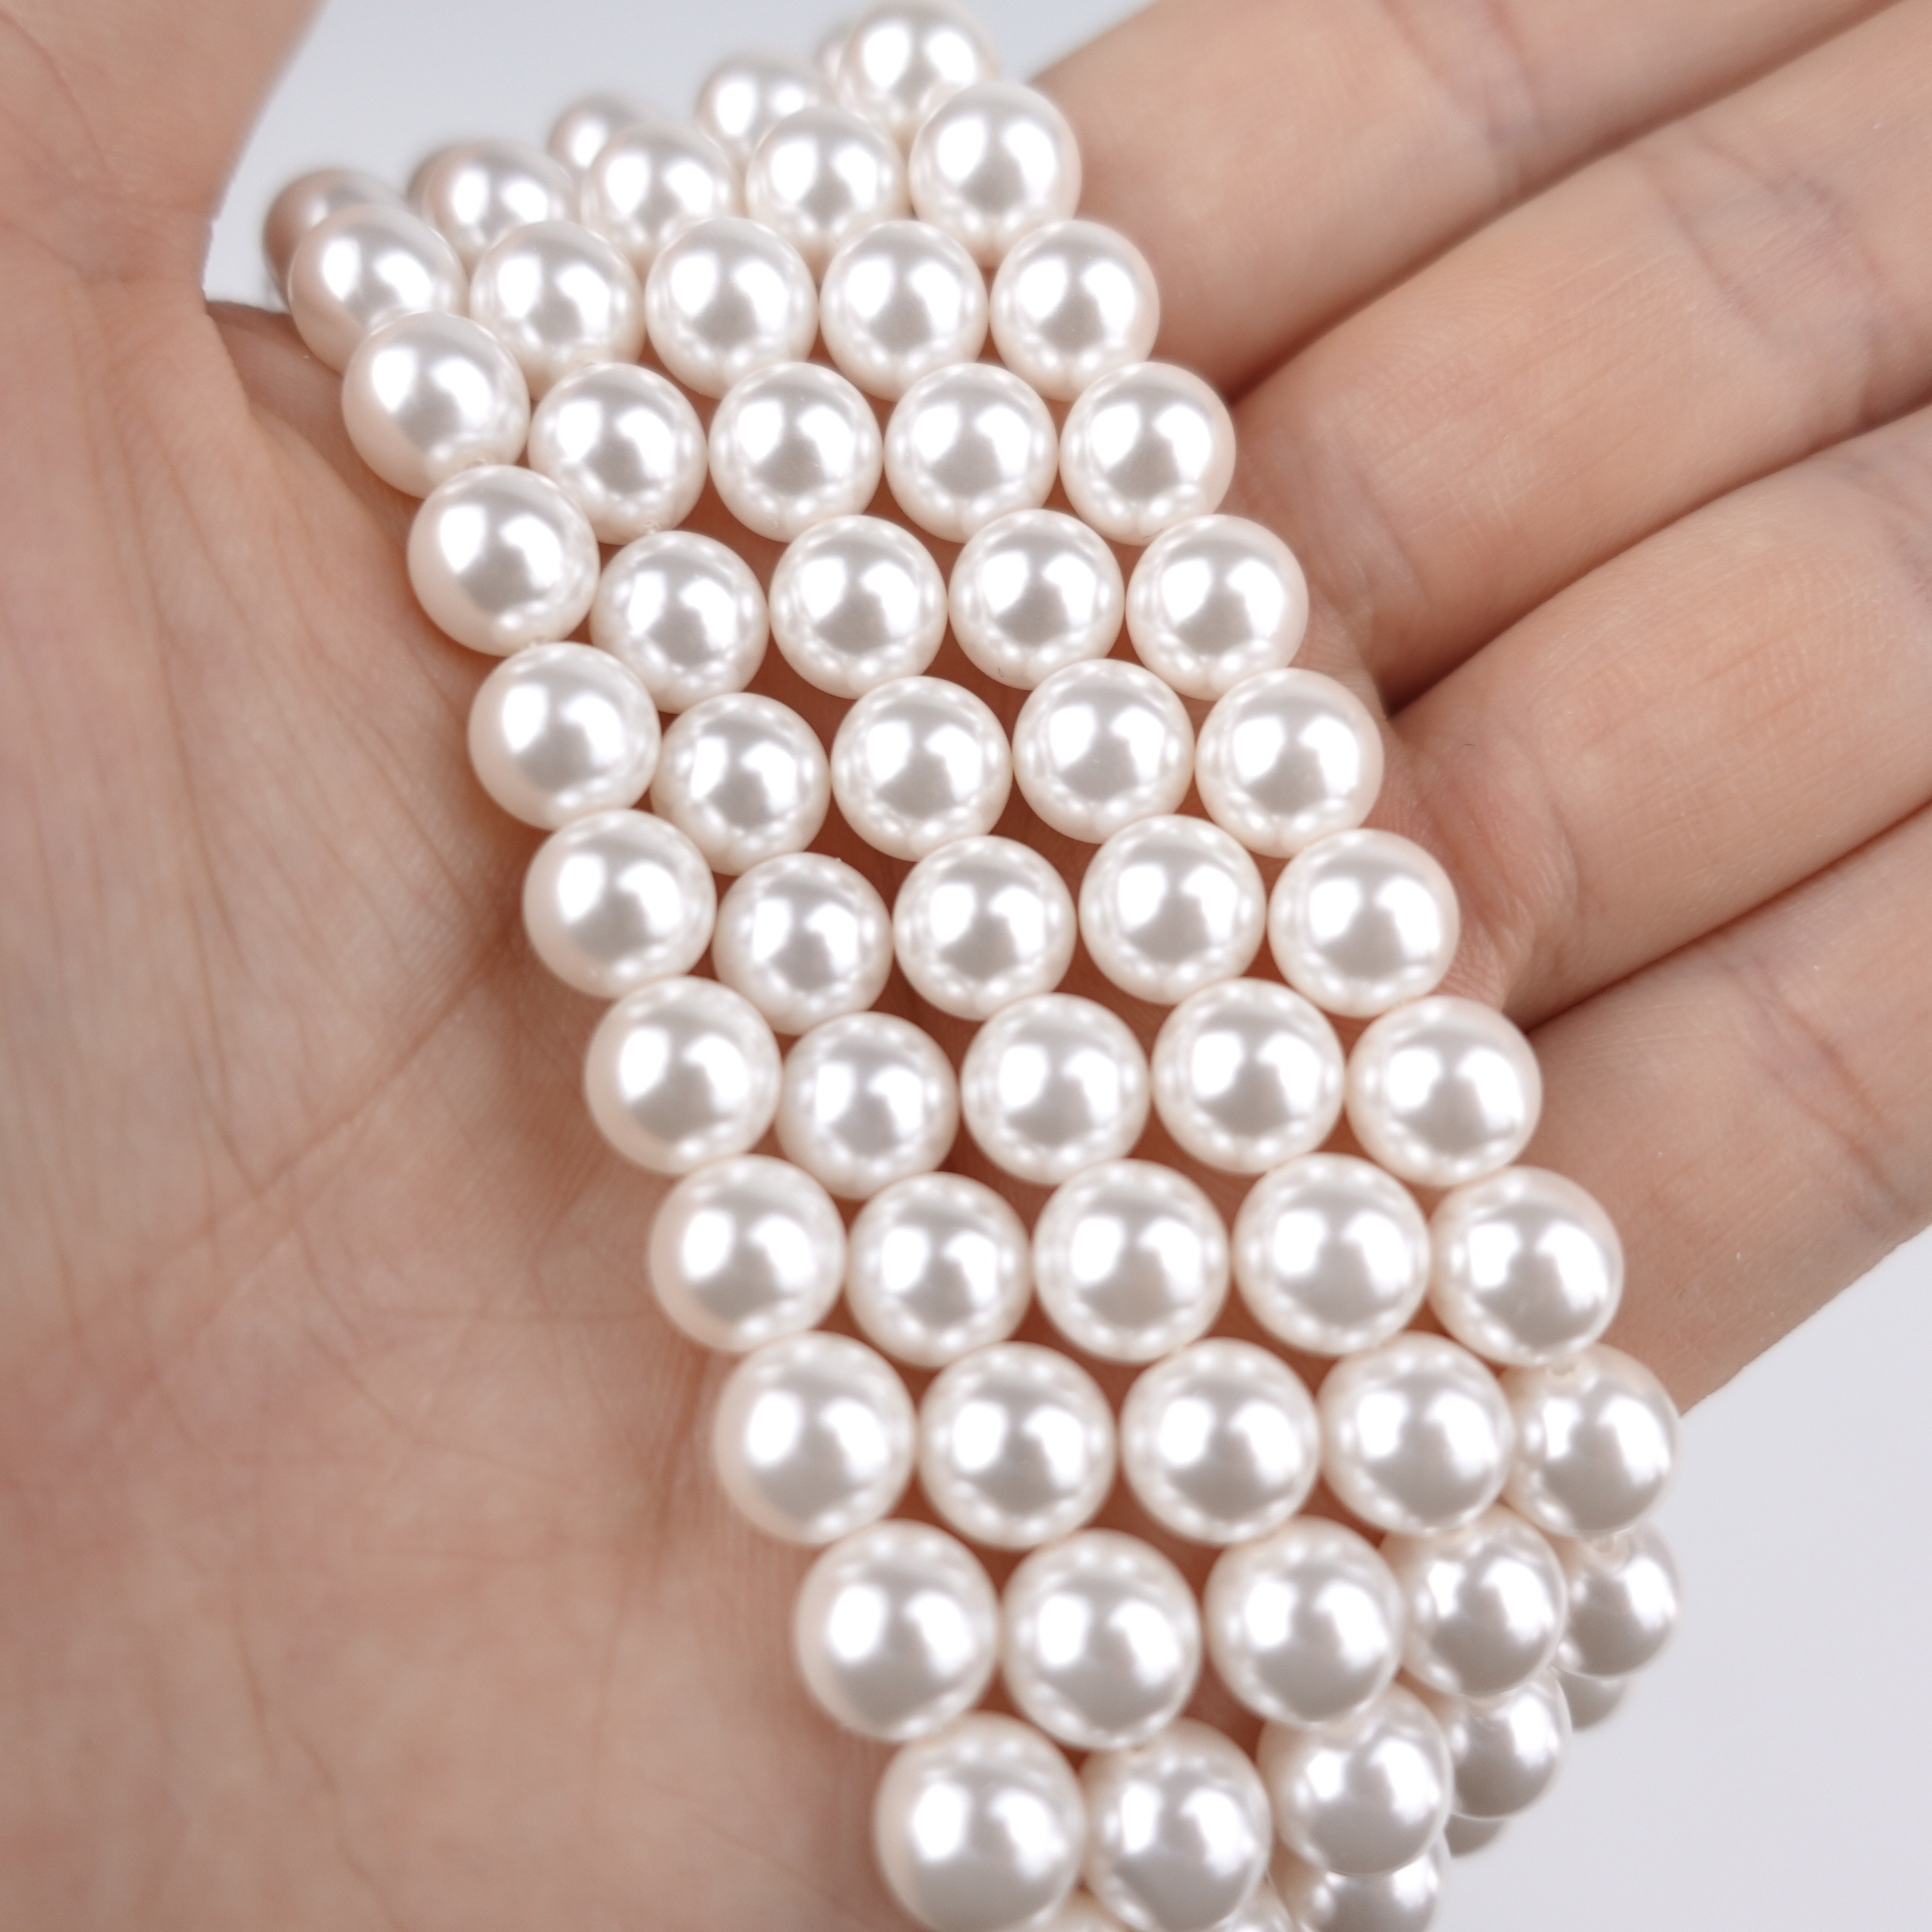 Anlan-angel White Pearl Beads,100pcs 16mm Loose Pearl Spacer Beads with Hole Big Size Faux Pearls Round White Beads for DIY Craft Bracelets